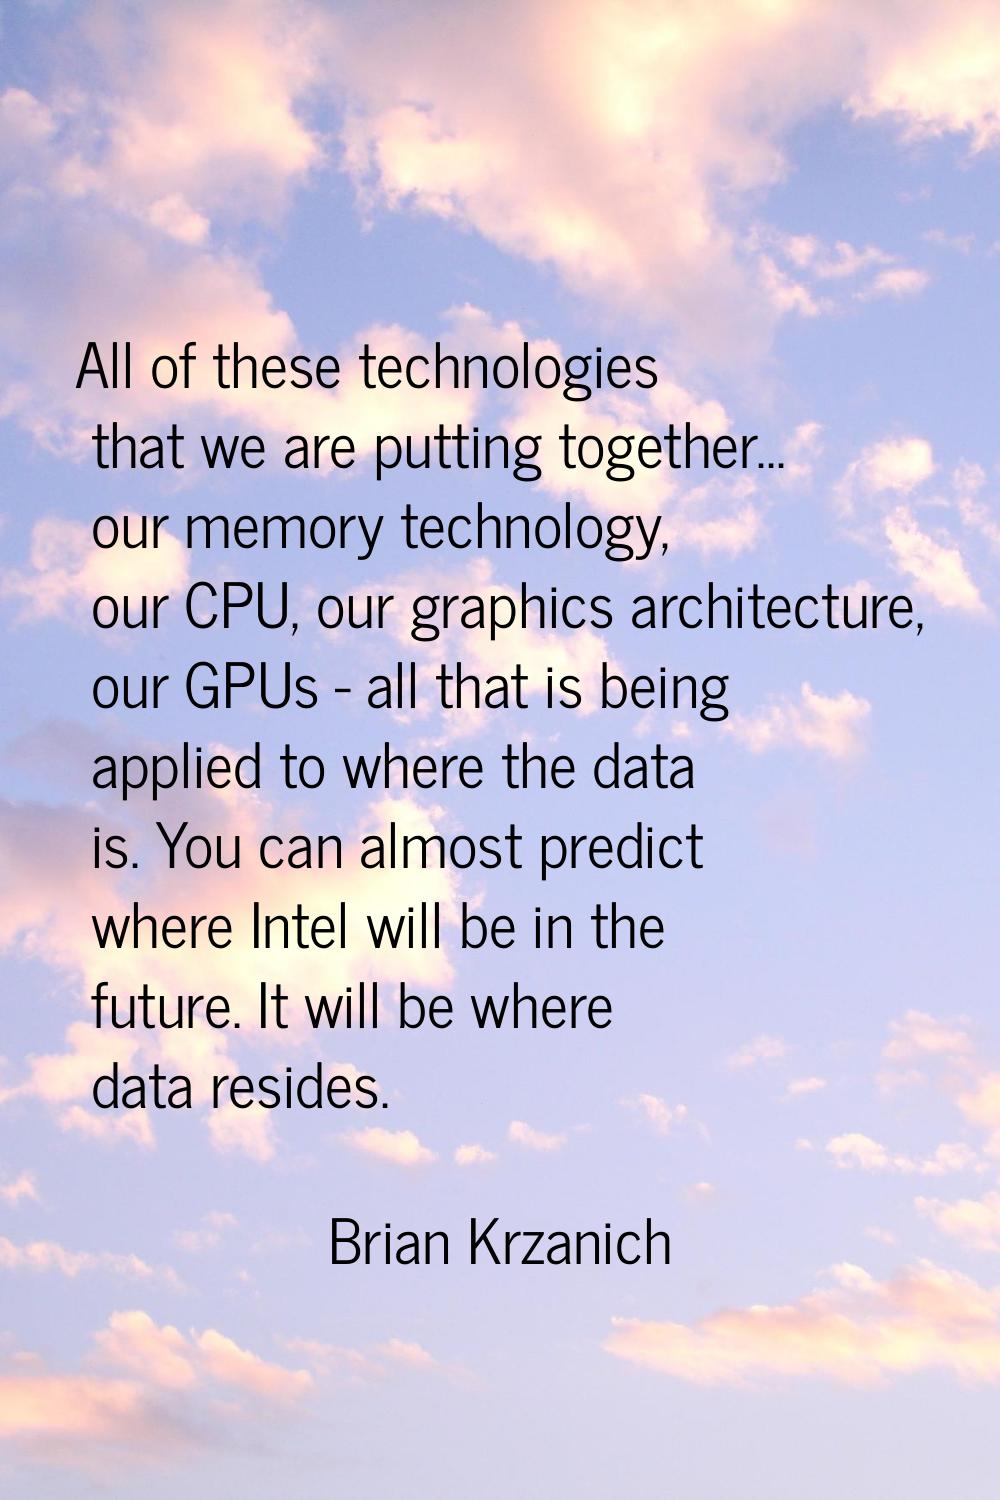 All of these technologies that we are putting together... our memory technology, our CPU, our graph